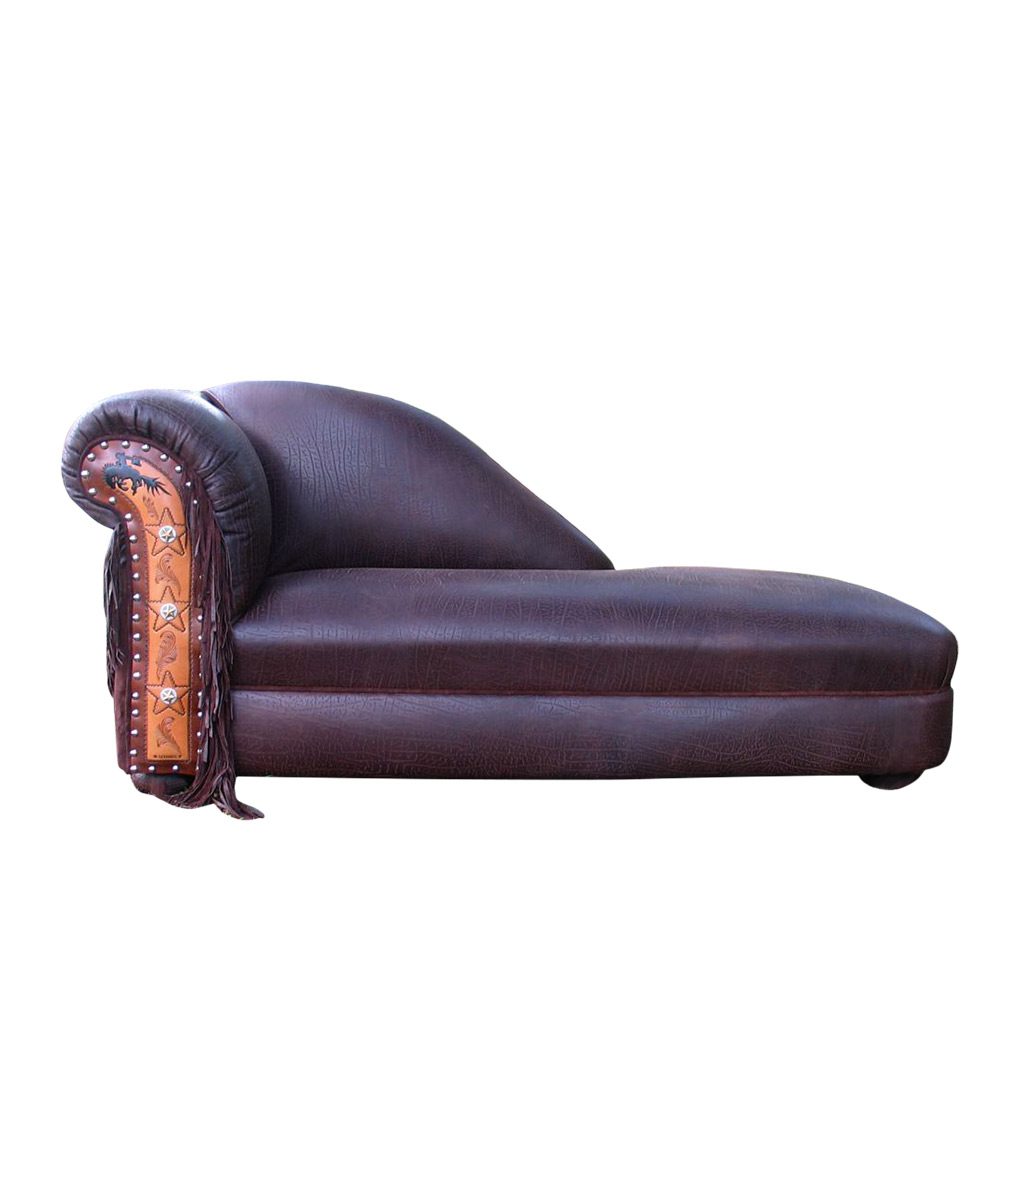 Leather Chaise Lounge With Western, Leather Chaise Chair